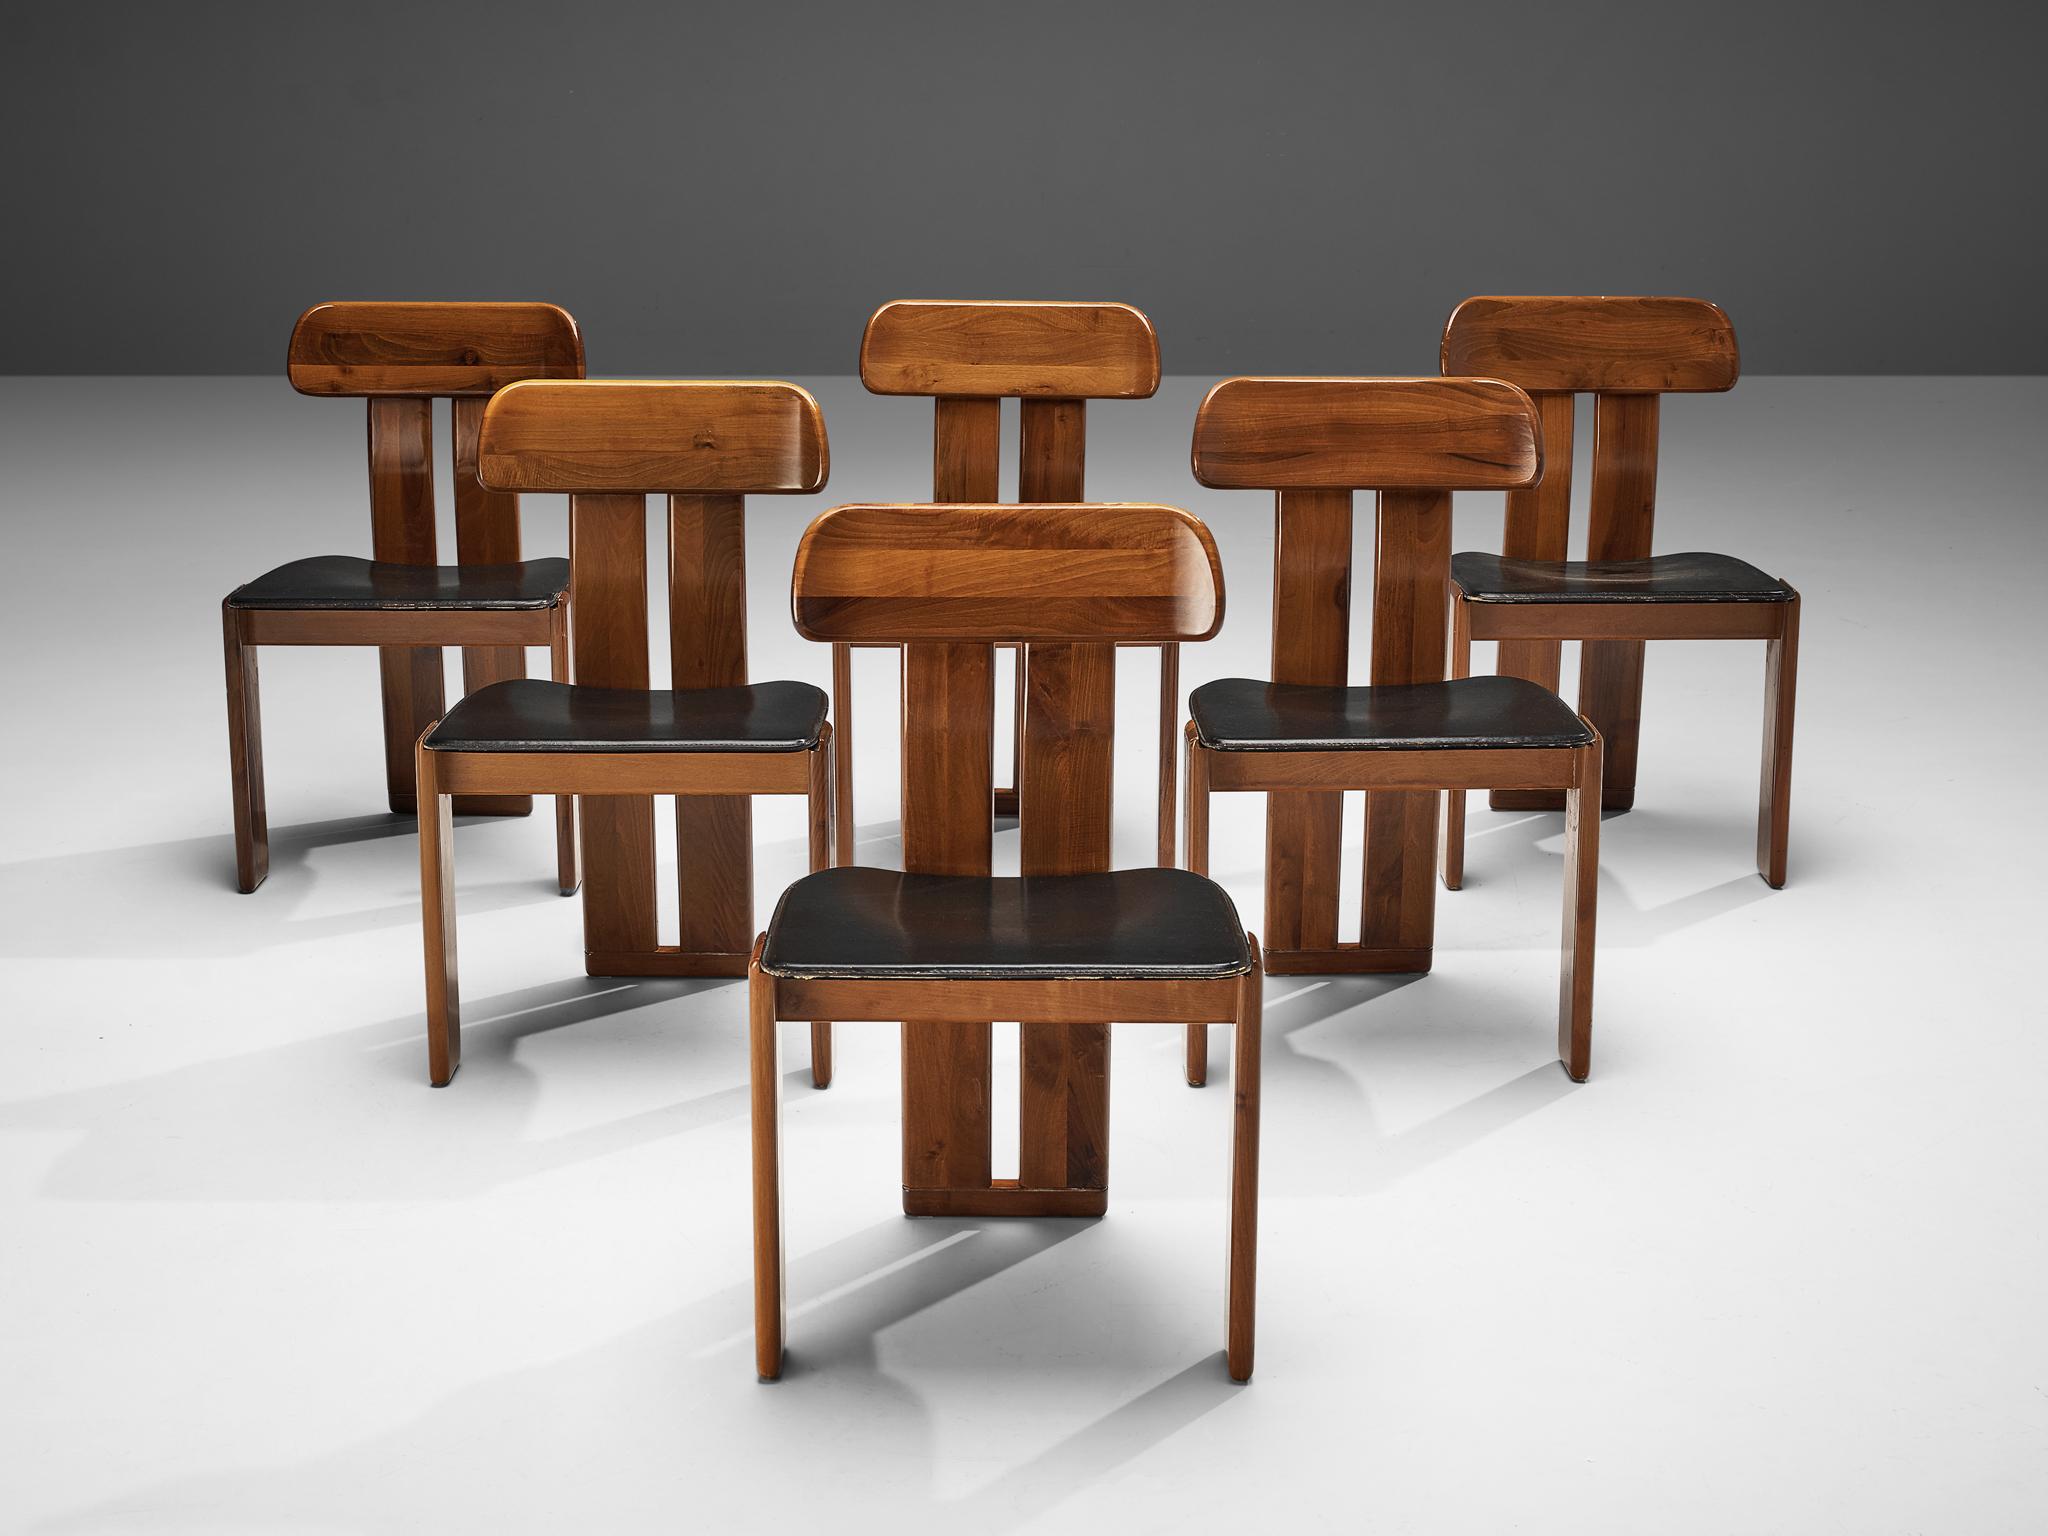 Mobil Girgi, set of six dining chairs, walnut, black leather, Italy, 1970s

Set of six sculptural chairs that feature wonderful backrests, consisting of two vertical slats distanced from each other. At the bottom and top these are connected, which